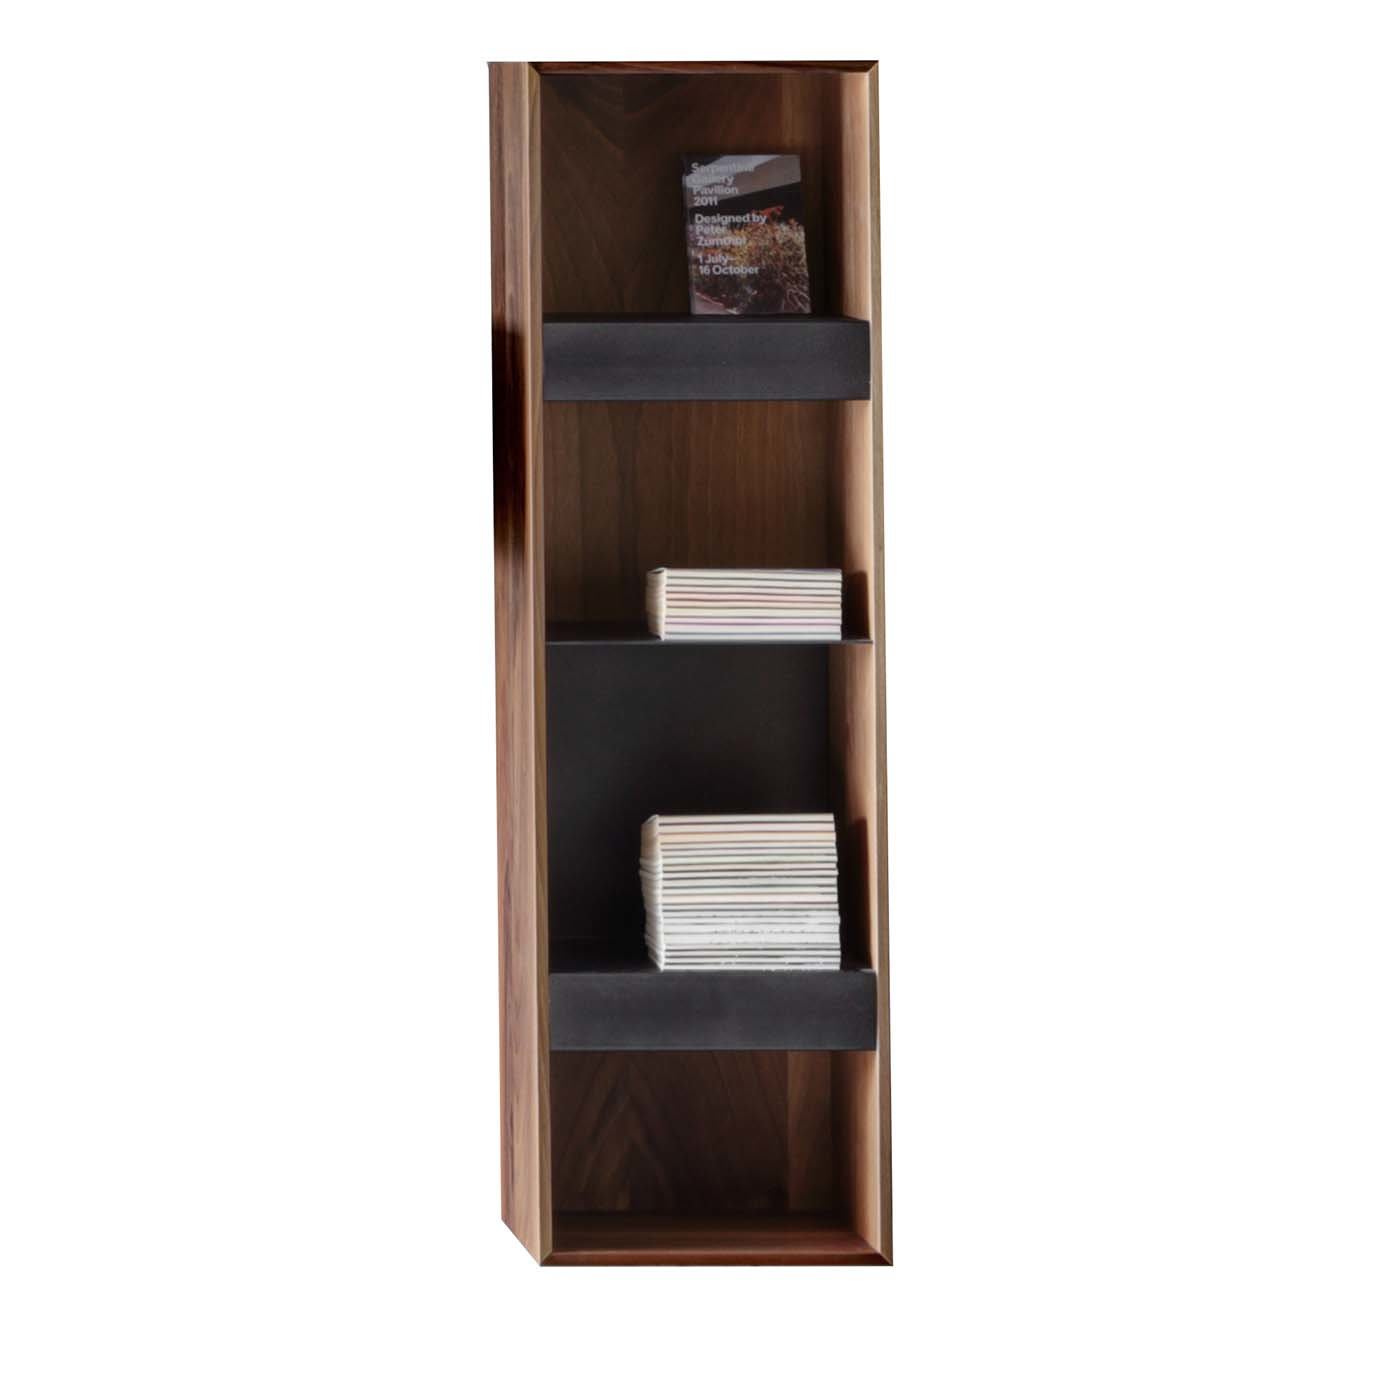 T Box Vertical Hanging Cabinet by Act_Romegialli - Fioroni